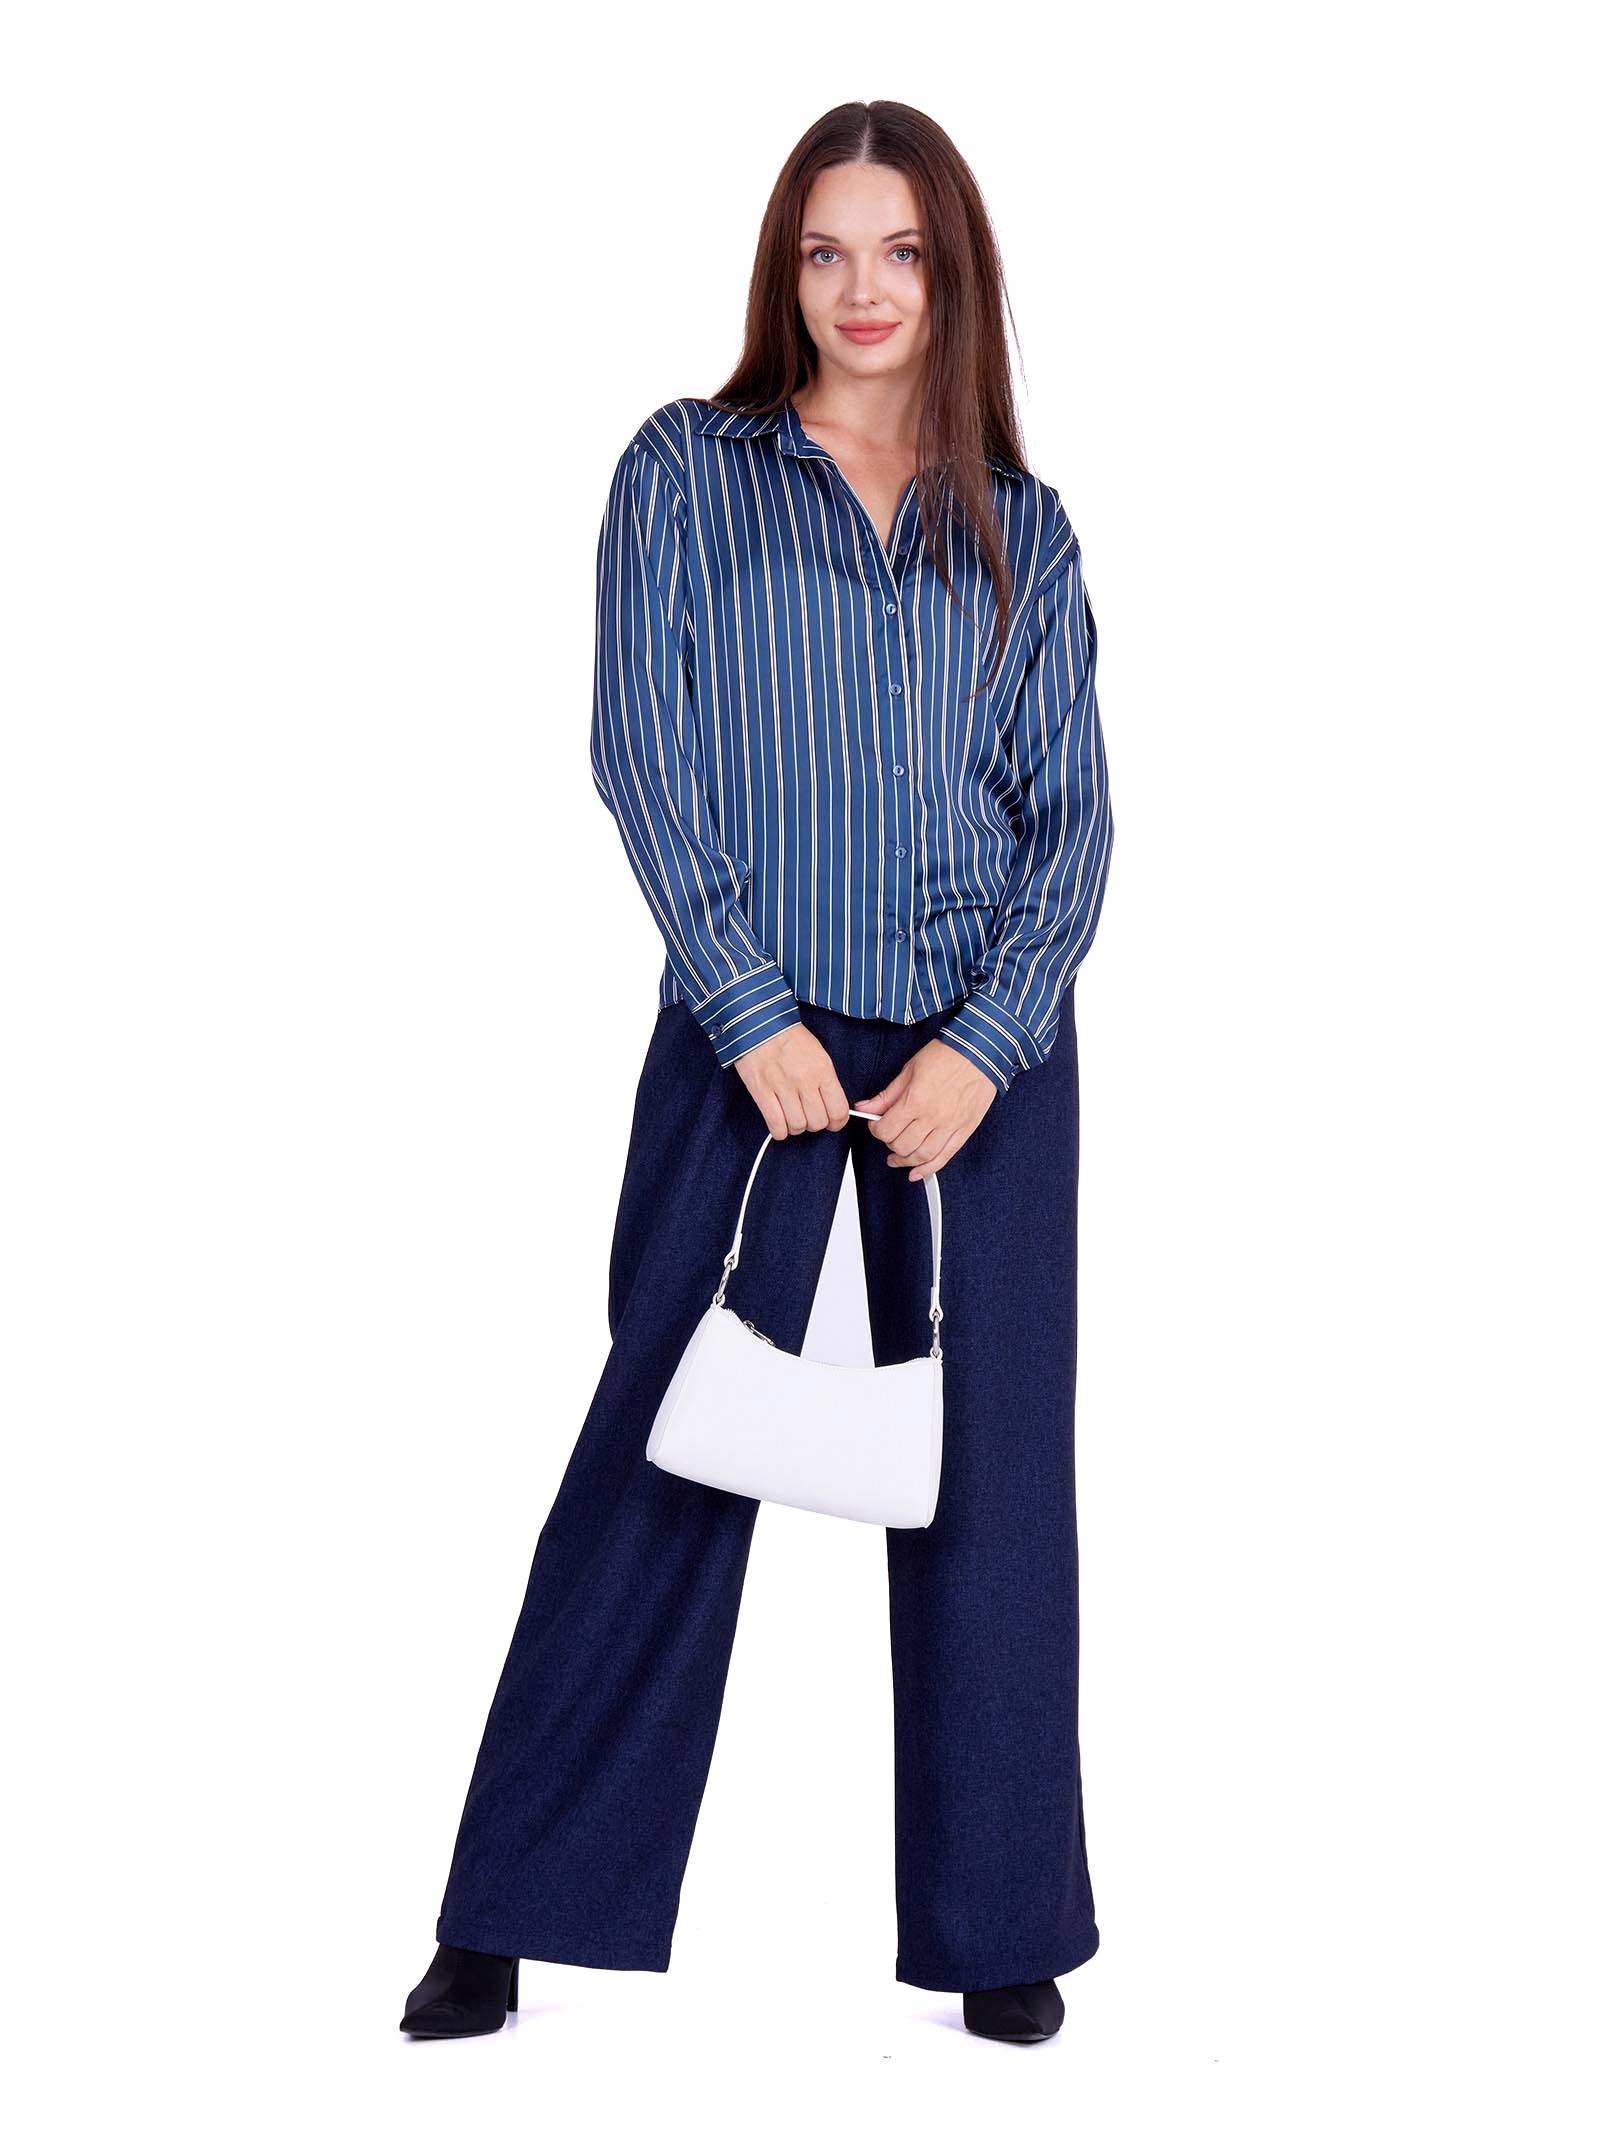 Satin striped Blouse classic fit Navy Blue